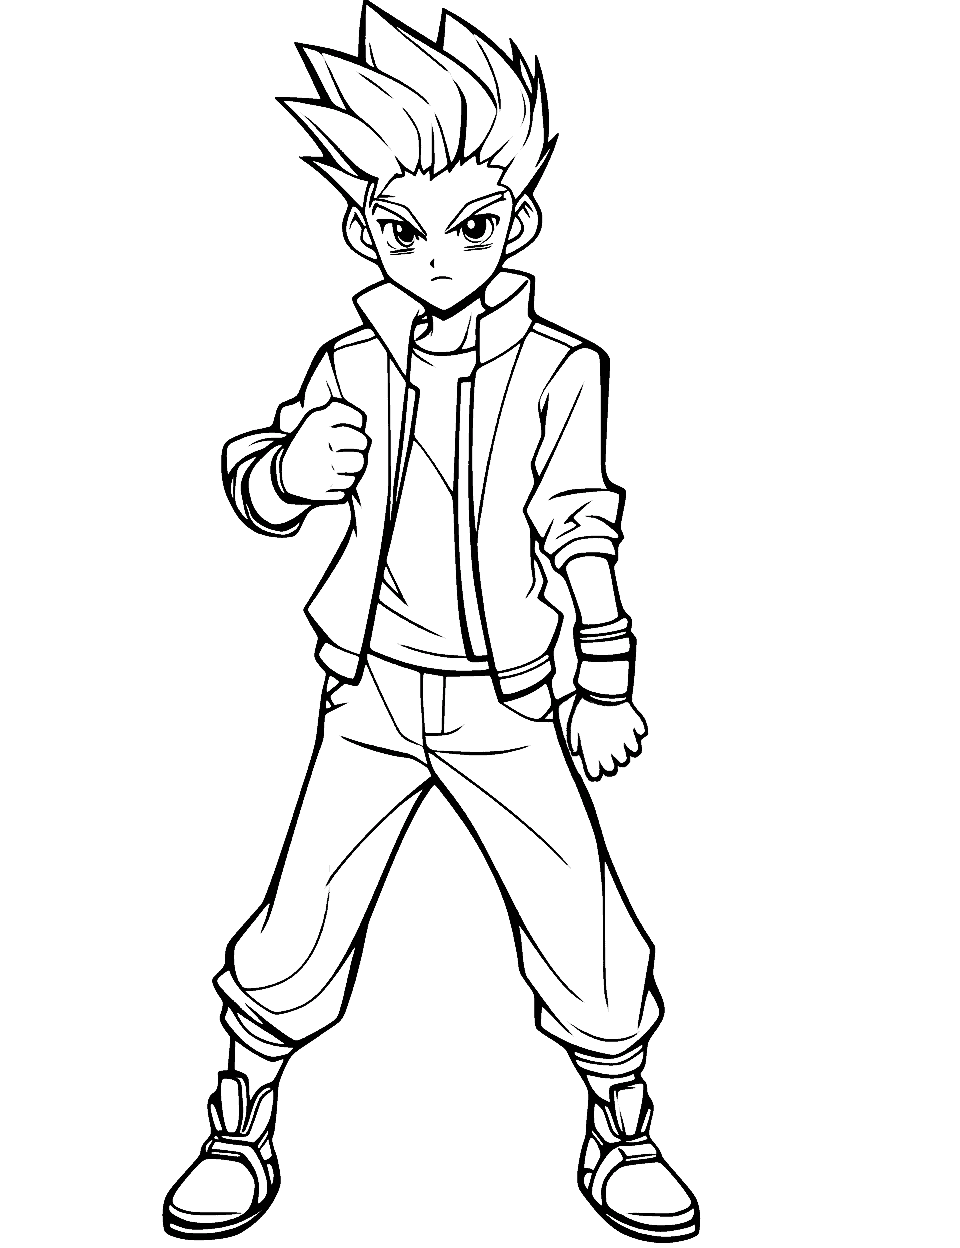 Cool Anime Boy Coloring Page - A cool anime boy in a dynamic pose, with stylish hair and cool attire.